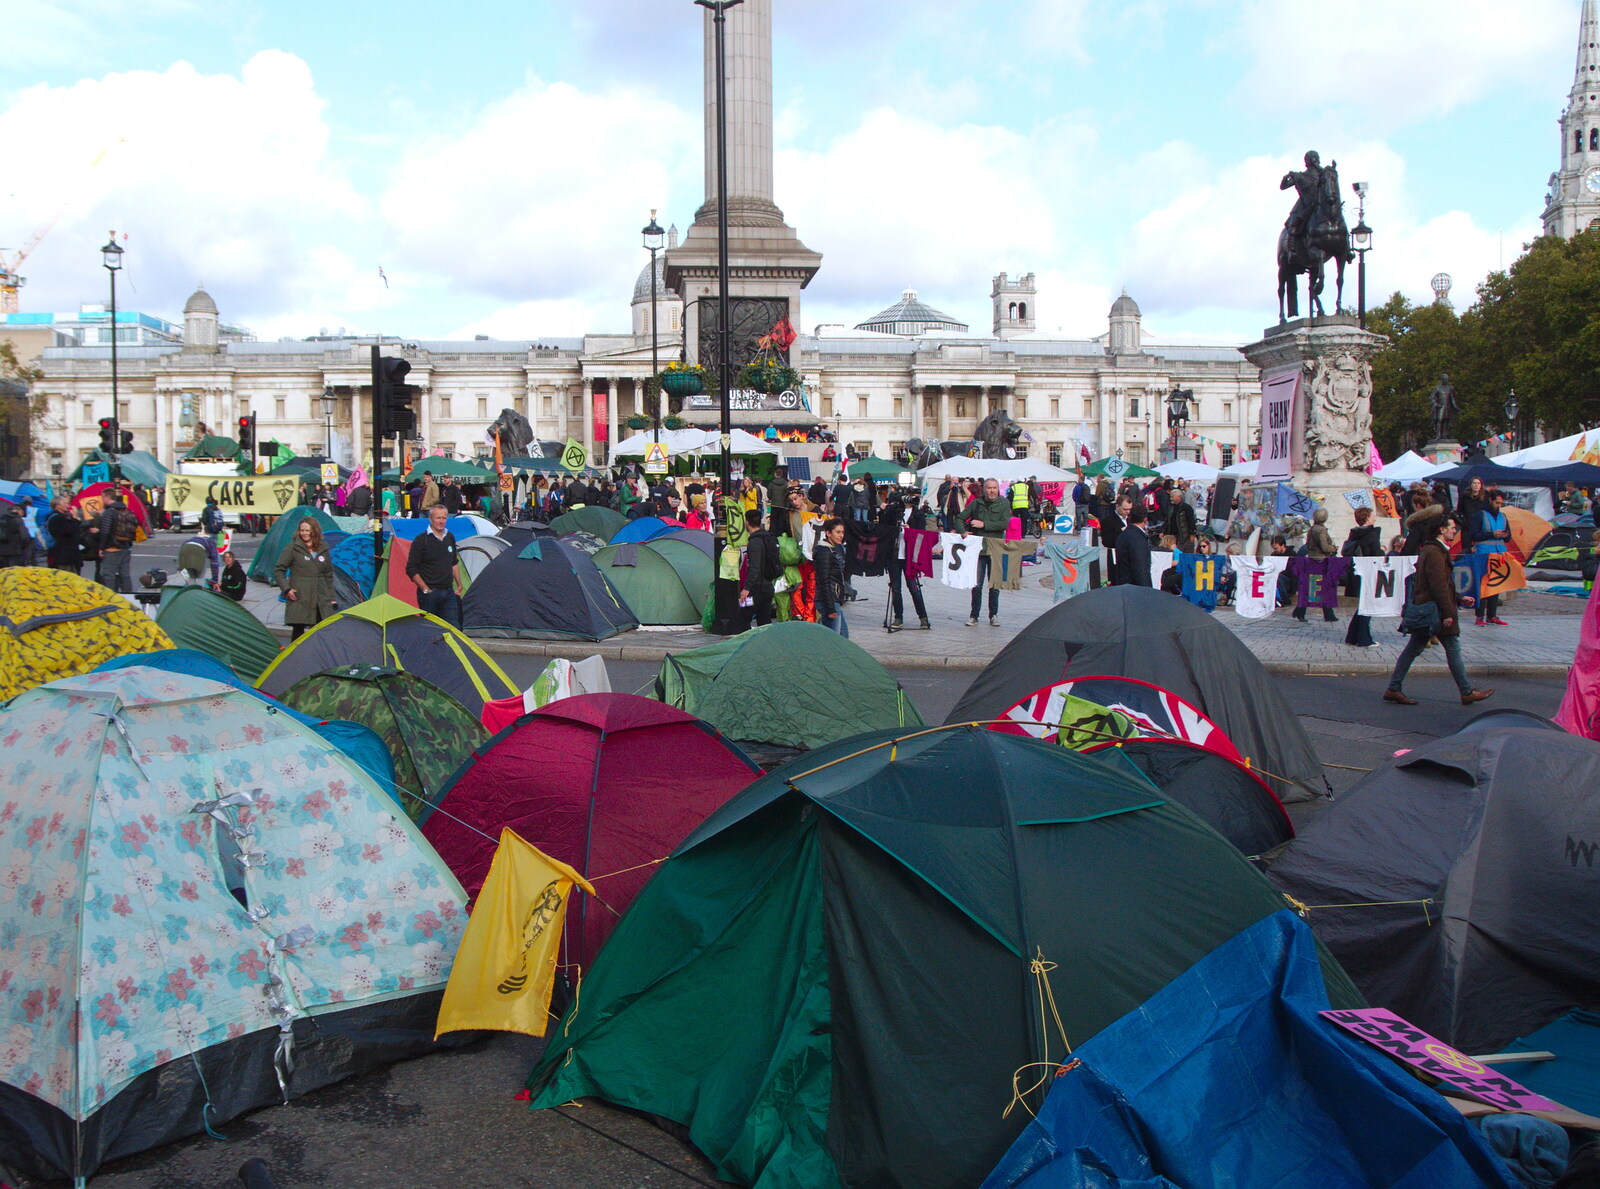 There are even more tents today from The Extinction Rebellion Protest, Westminster, London - 9th October 2019